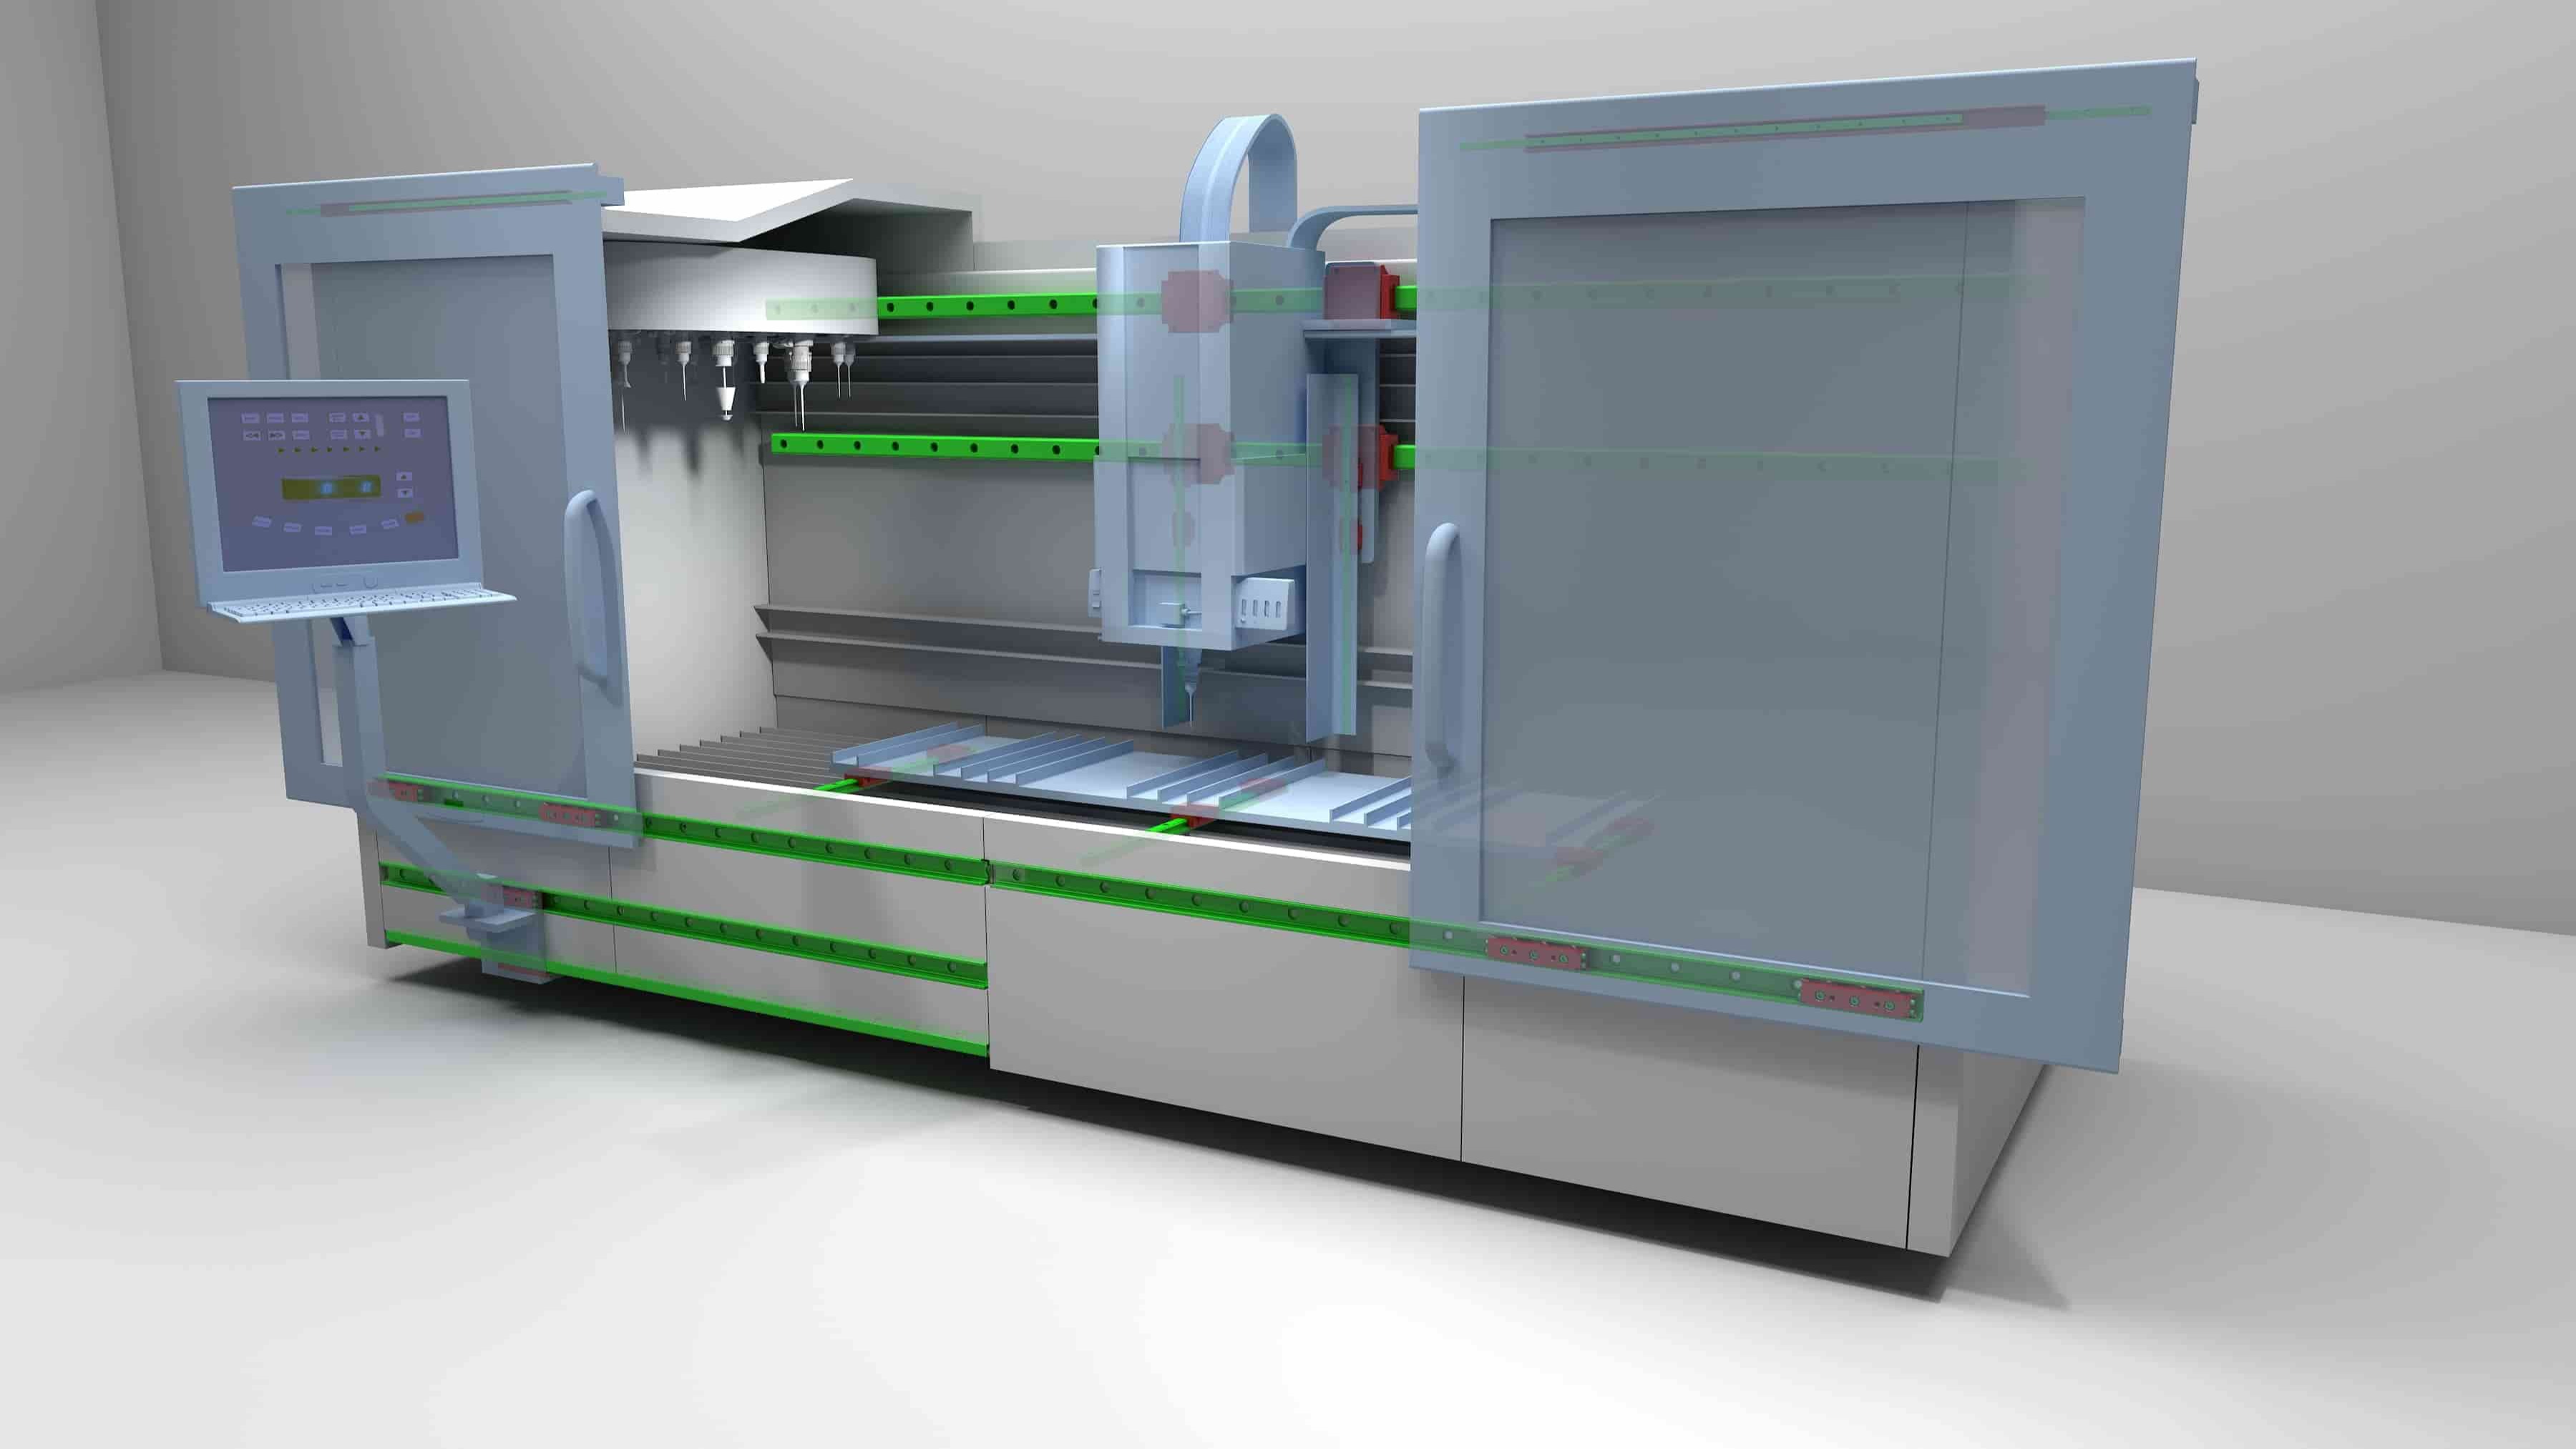 ELIMINATING HIDDEN COSTS INVOLVED IN DESIGNING A MACHINE